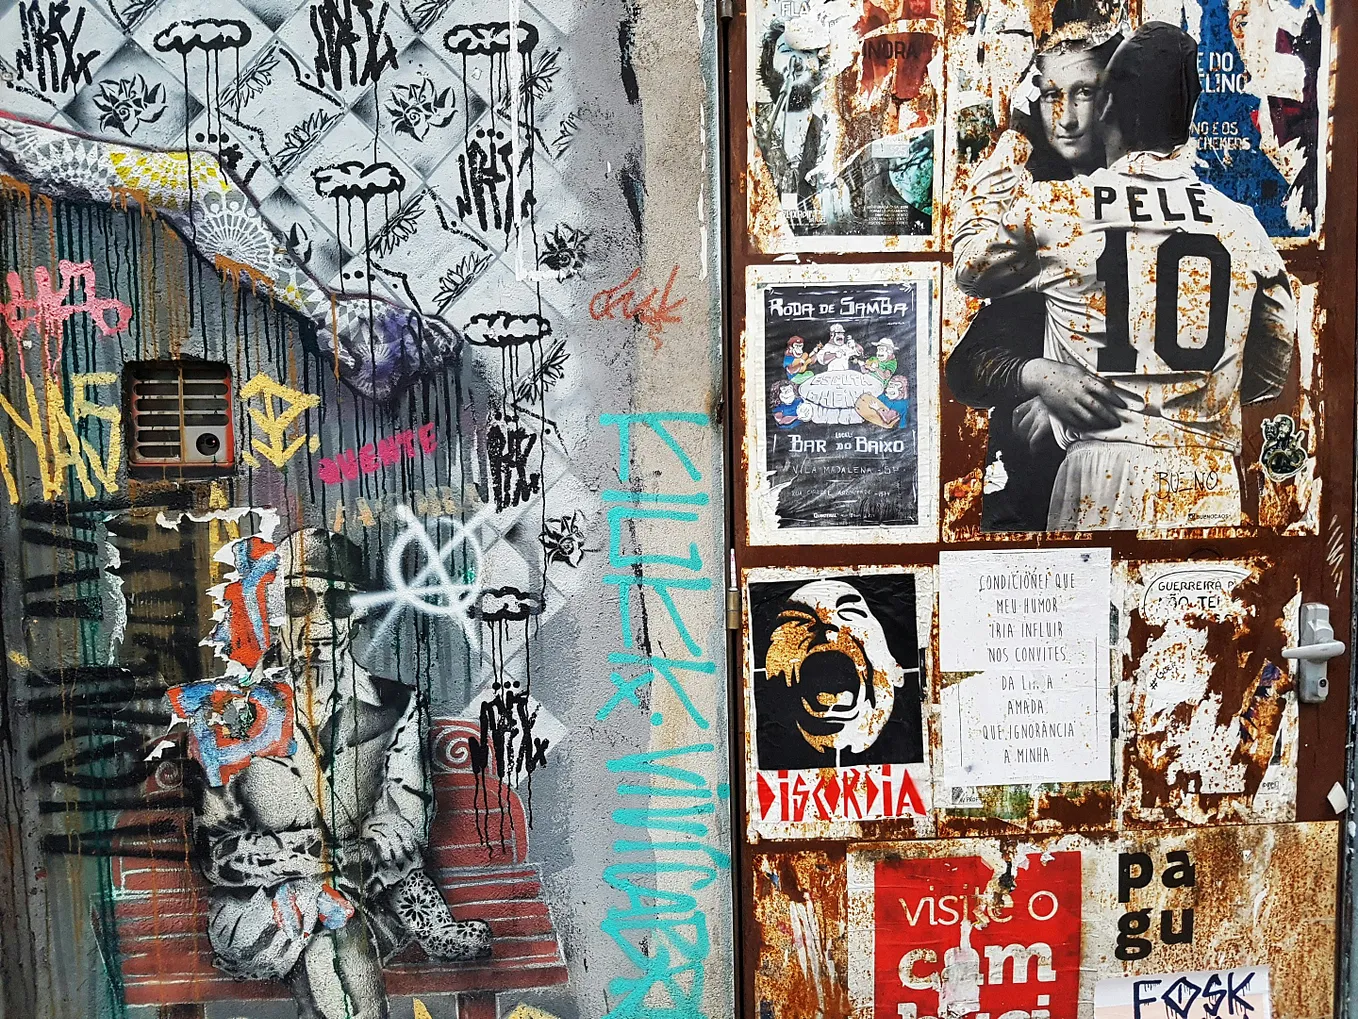 Photo of a wall outside that is covered with stickers and political posters with punk themes by Mínimo on Unsplash